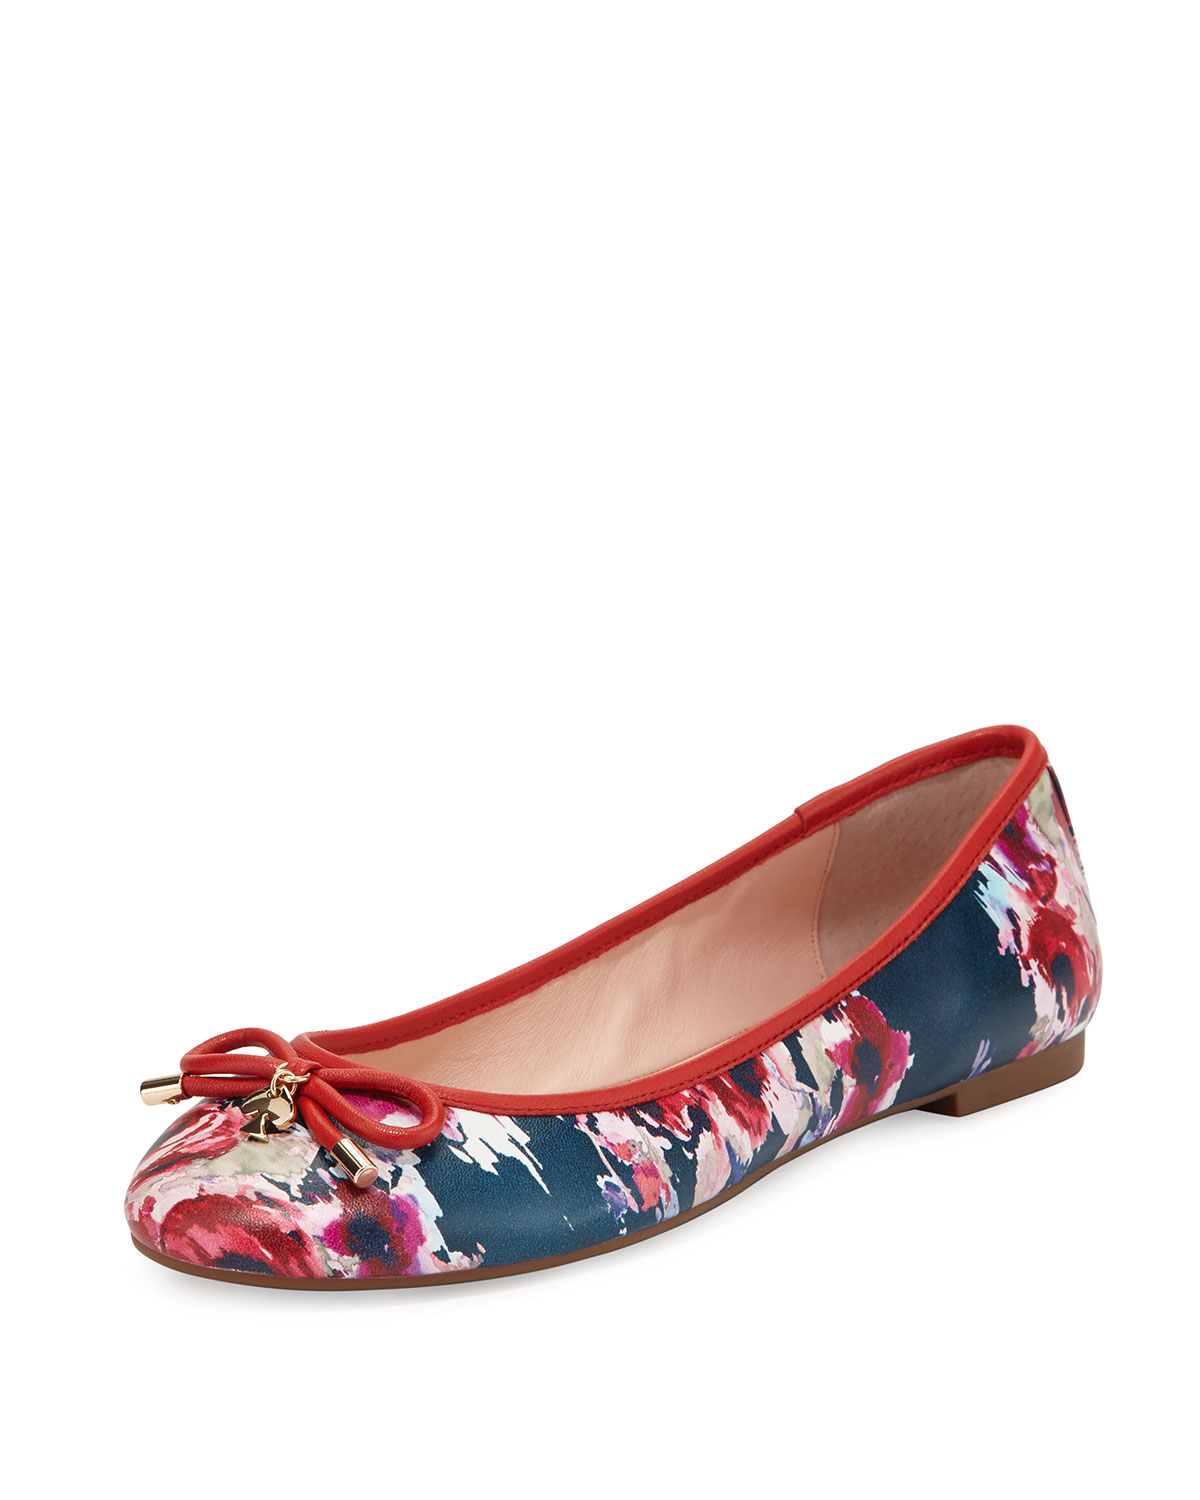 Kate spade Willa Floral-print Leather Ballerina Flat in Multicolor | Lyst